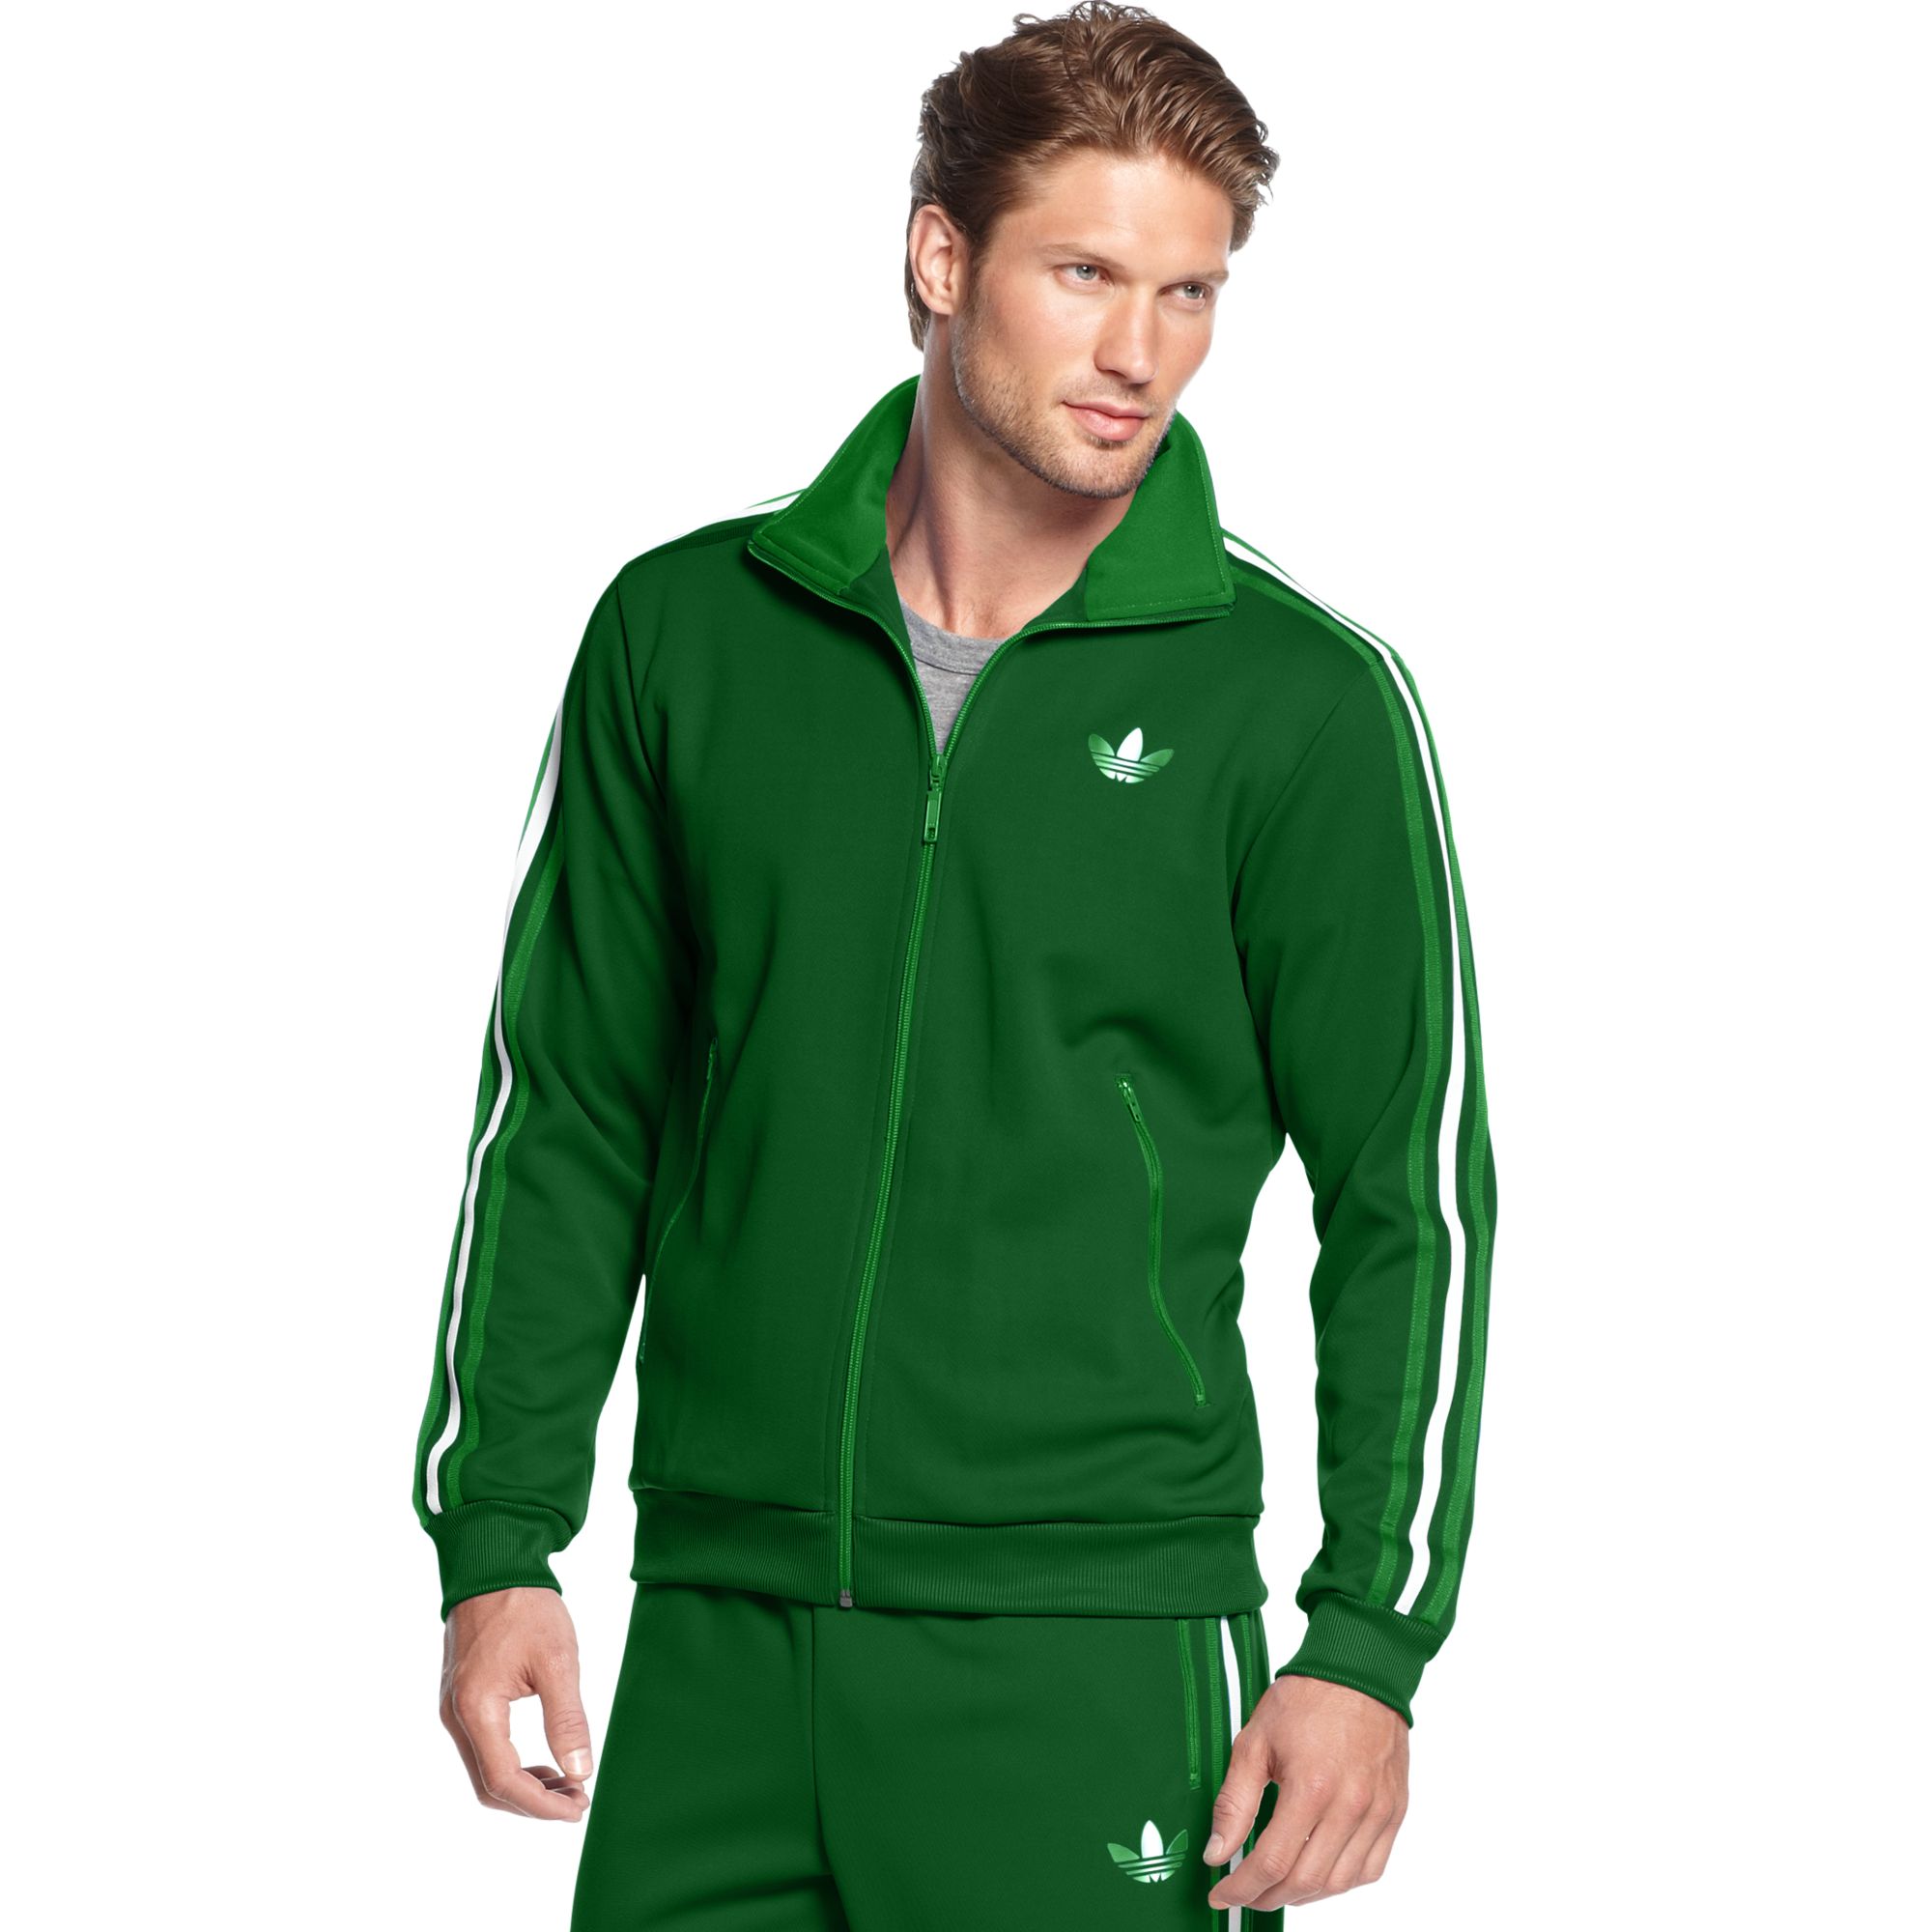 Lyst - Adidas Track Jacket in Green for Men